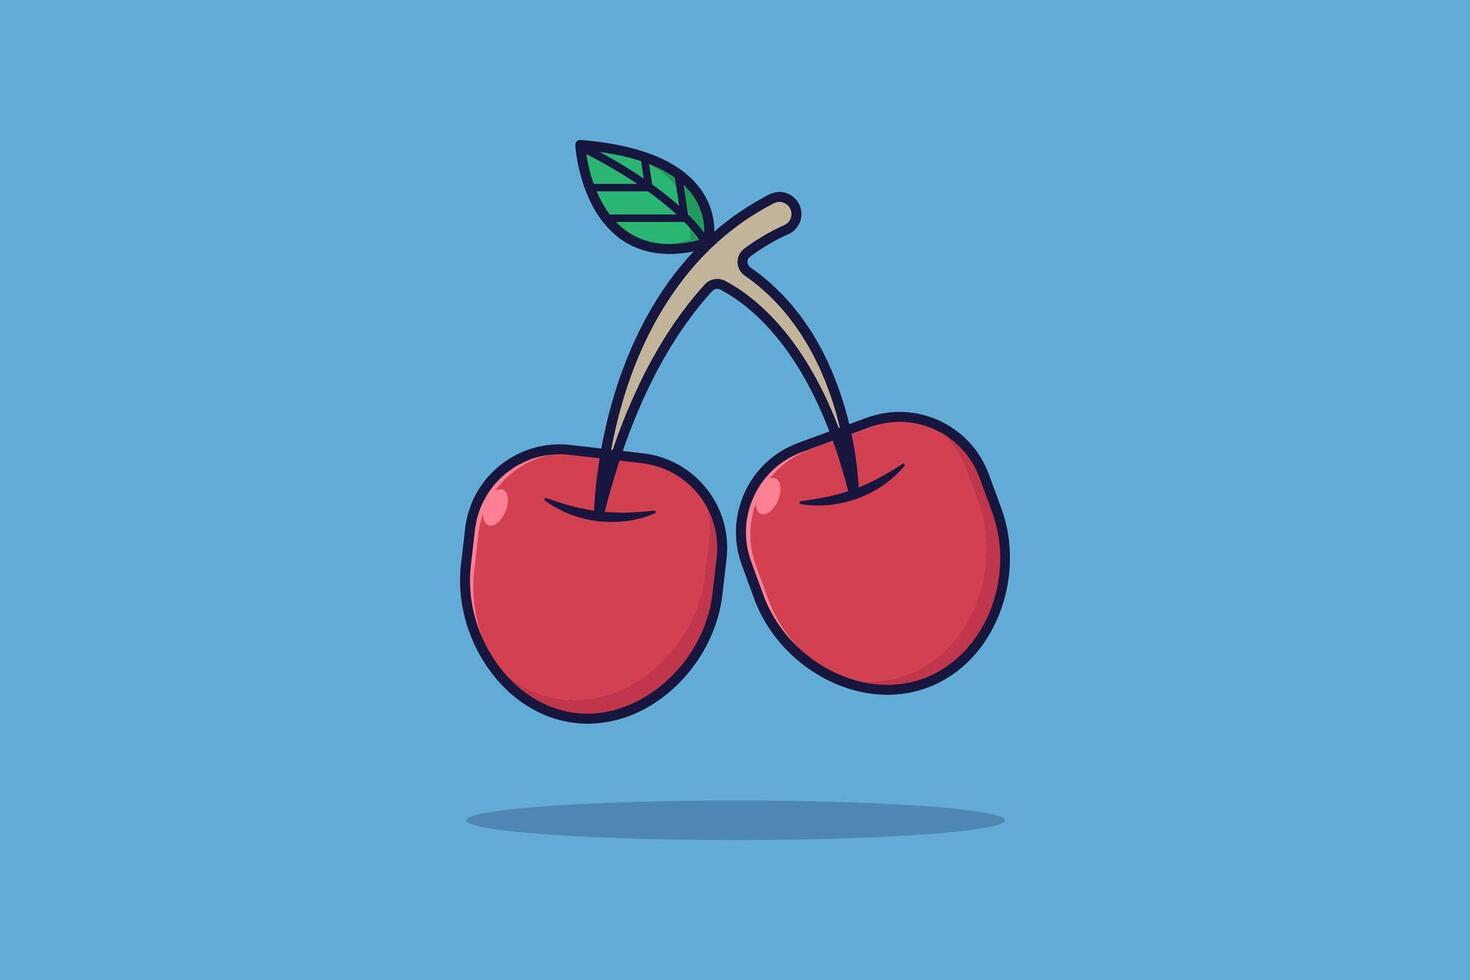 Cherry fruit icon vector illustration design template isolated on blue background